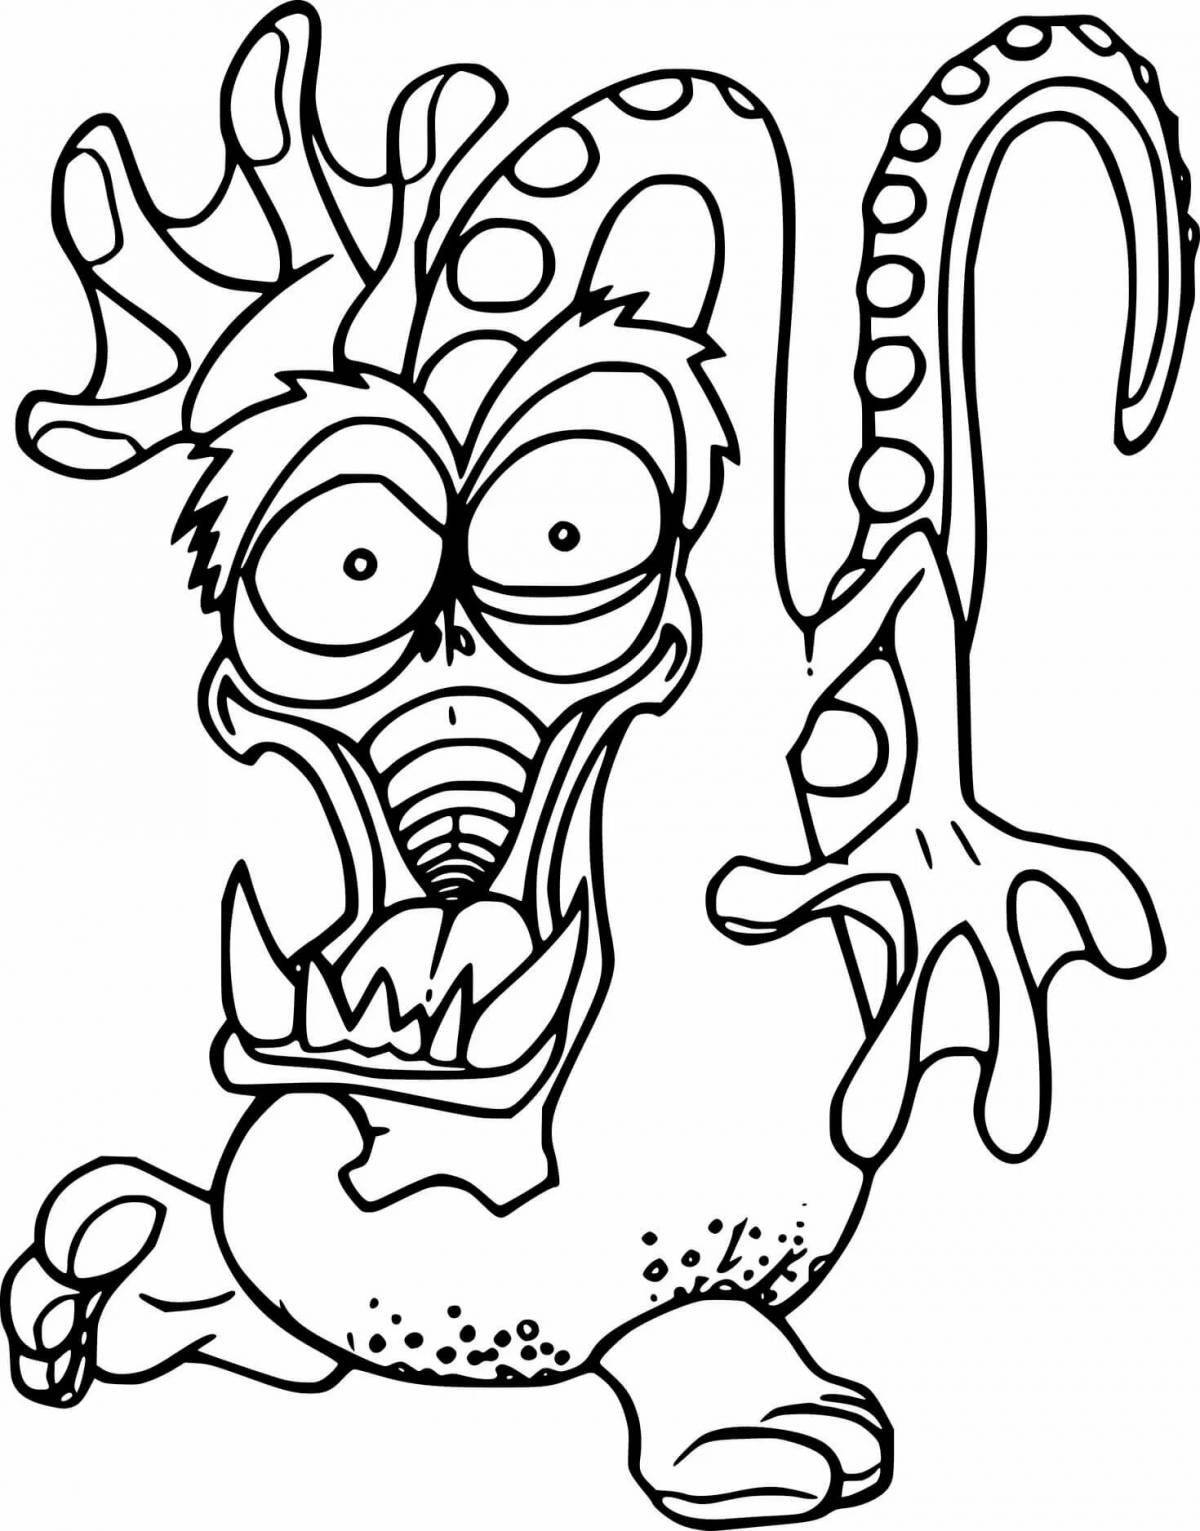 Attractive gray monster coloring page